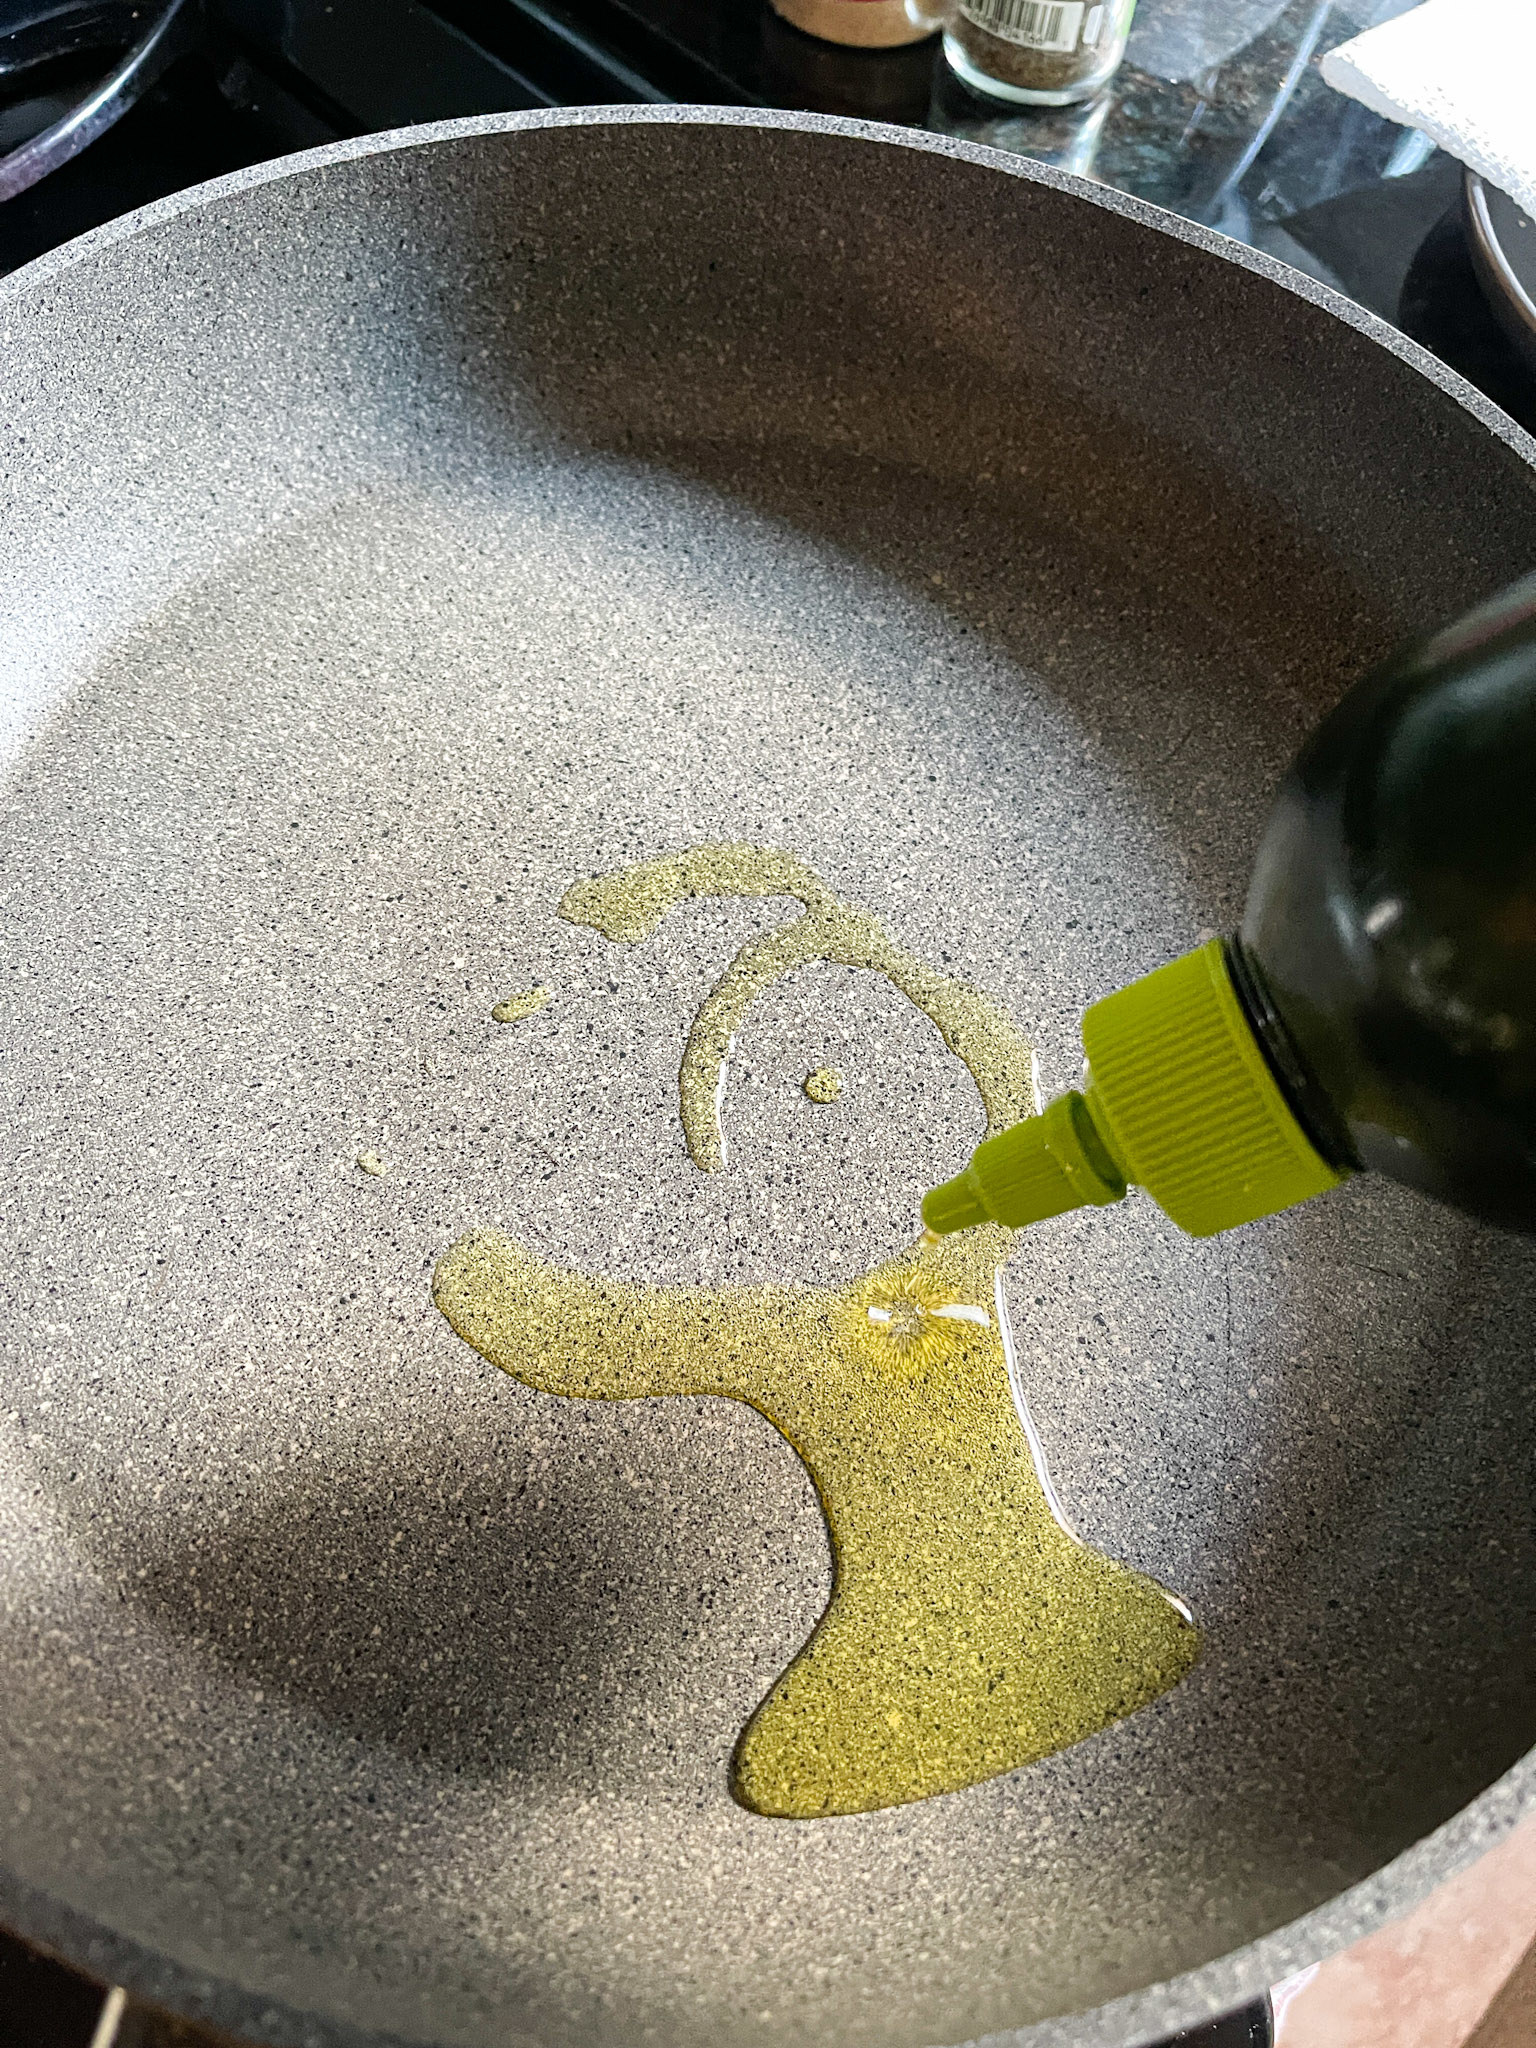 Someone putting oil on a pan